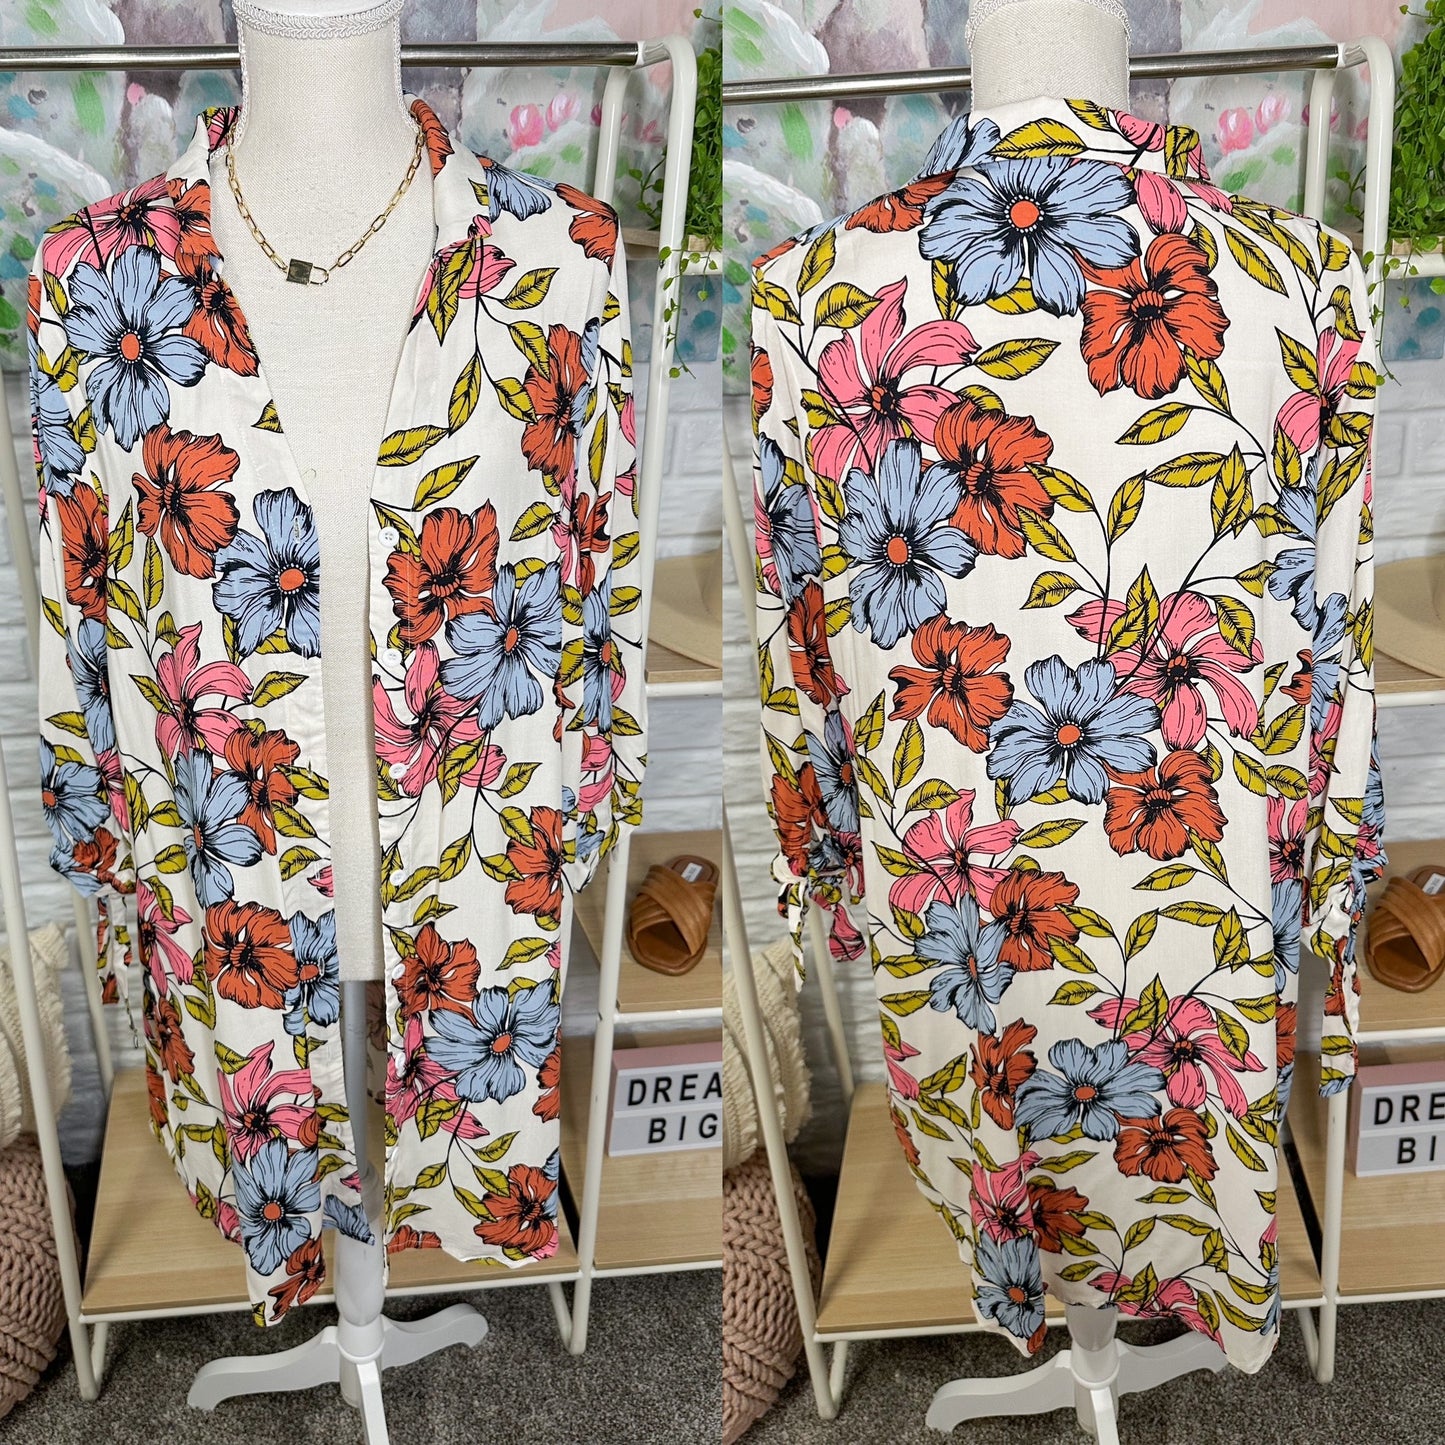 Cupshe New Floral Button Down Cover Up Dress Size Medium